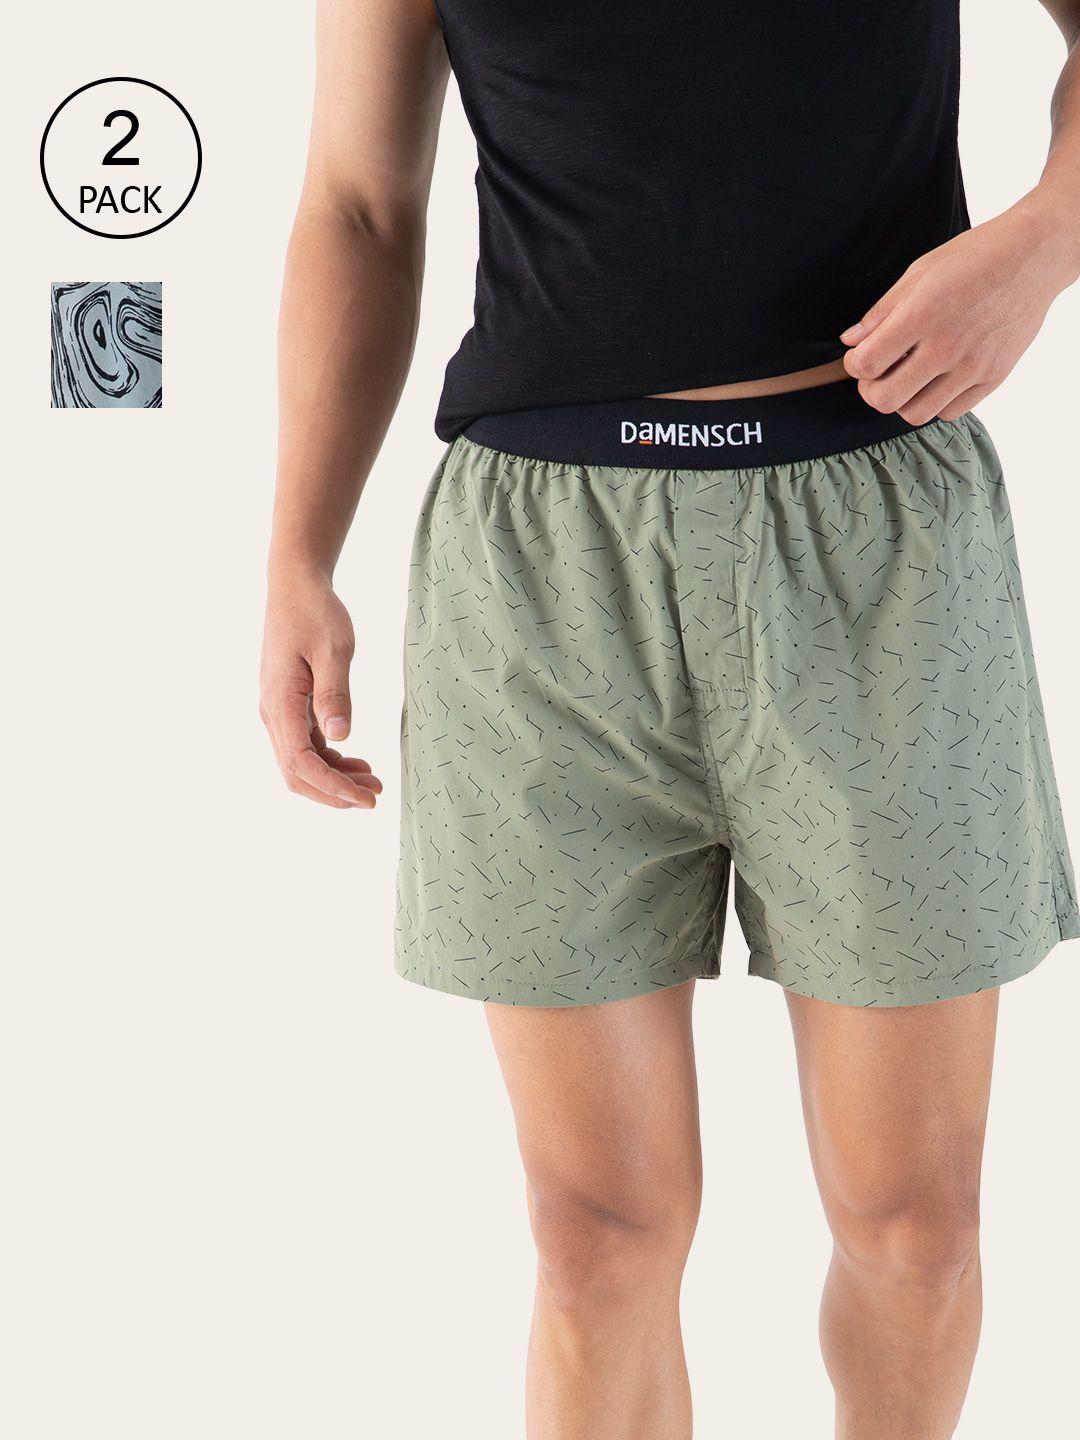 damensch-men-pack-of-2-printed-cotton-boxers-dam-prin-sbx-pack-2-dgn